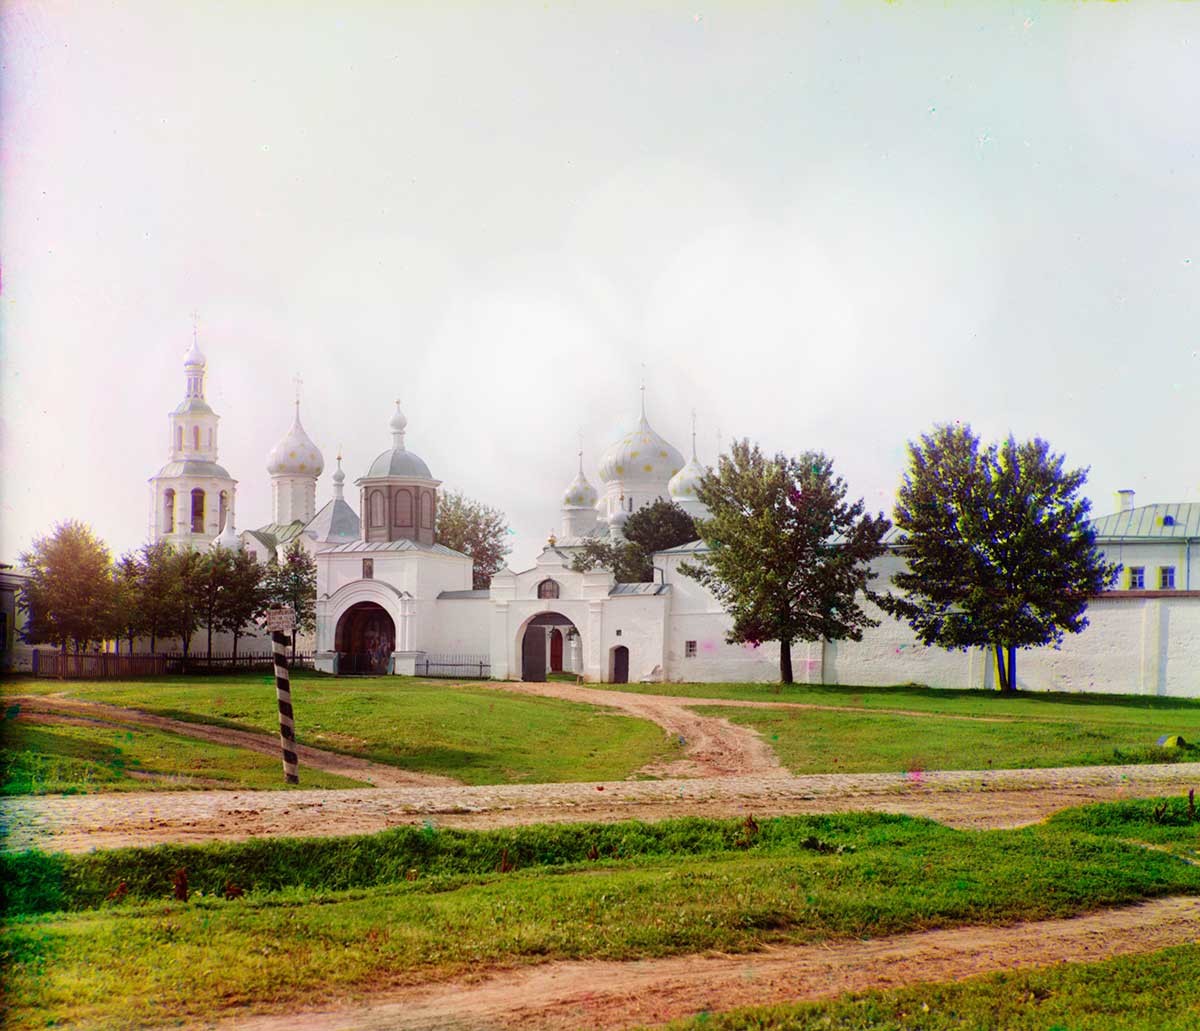 St. Theodore Convent, northwest view. From left: Bell tower, Presentation Church cupola, Chapel of St. Theodore Icon of the Virgin, bellcote over Holy Gate, Cathedral of St. Theodore, north wall. Summer 1911.